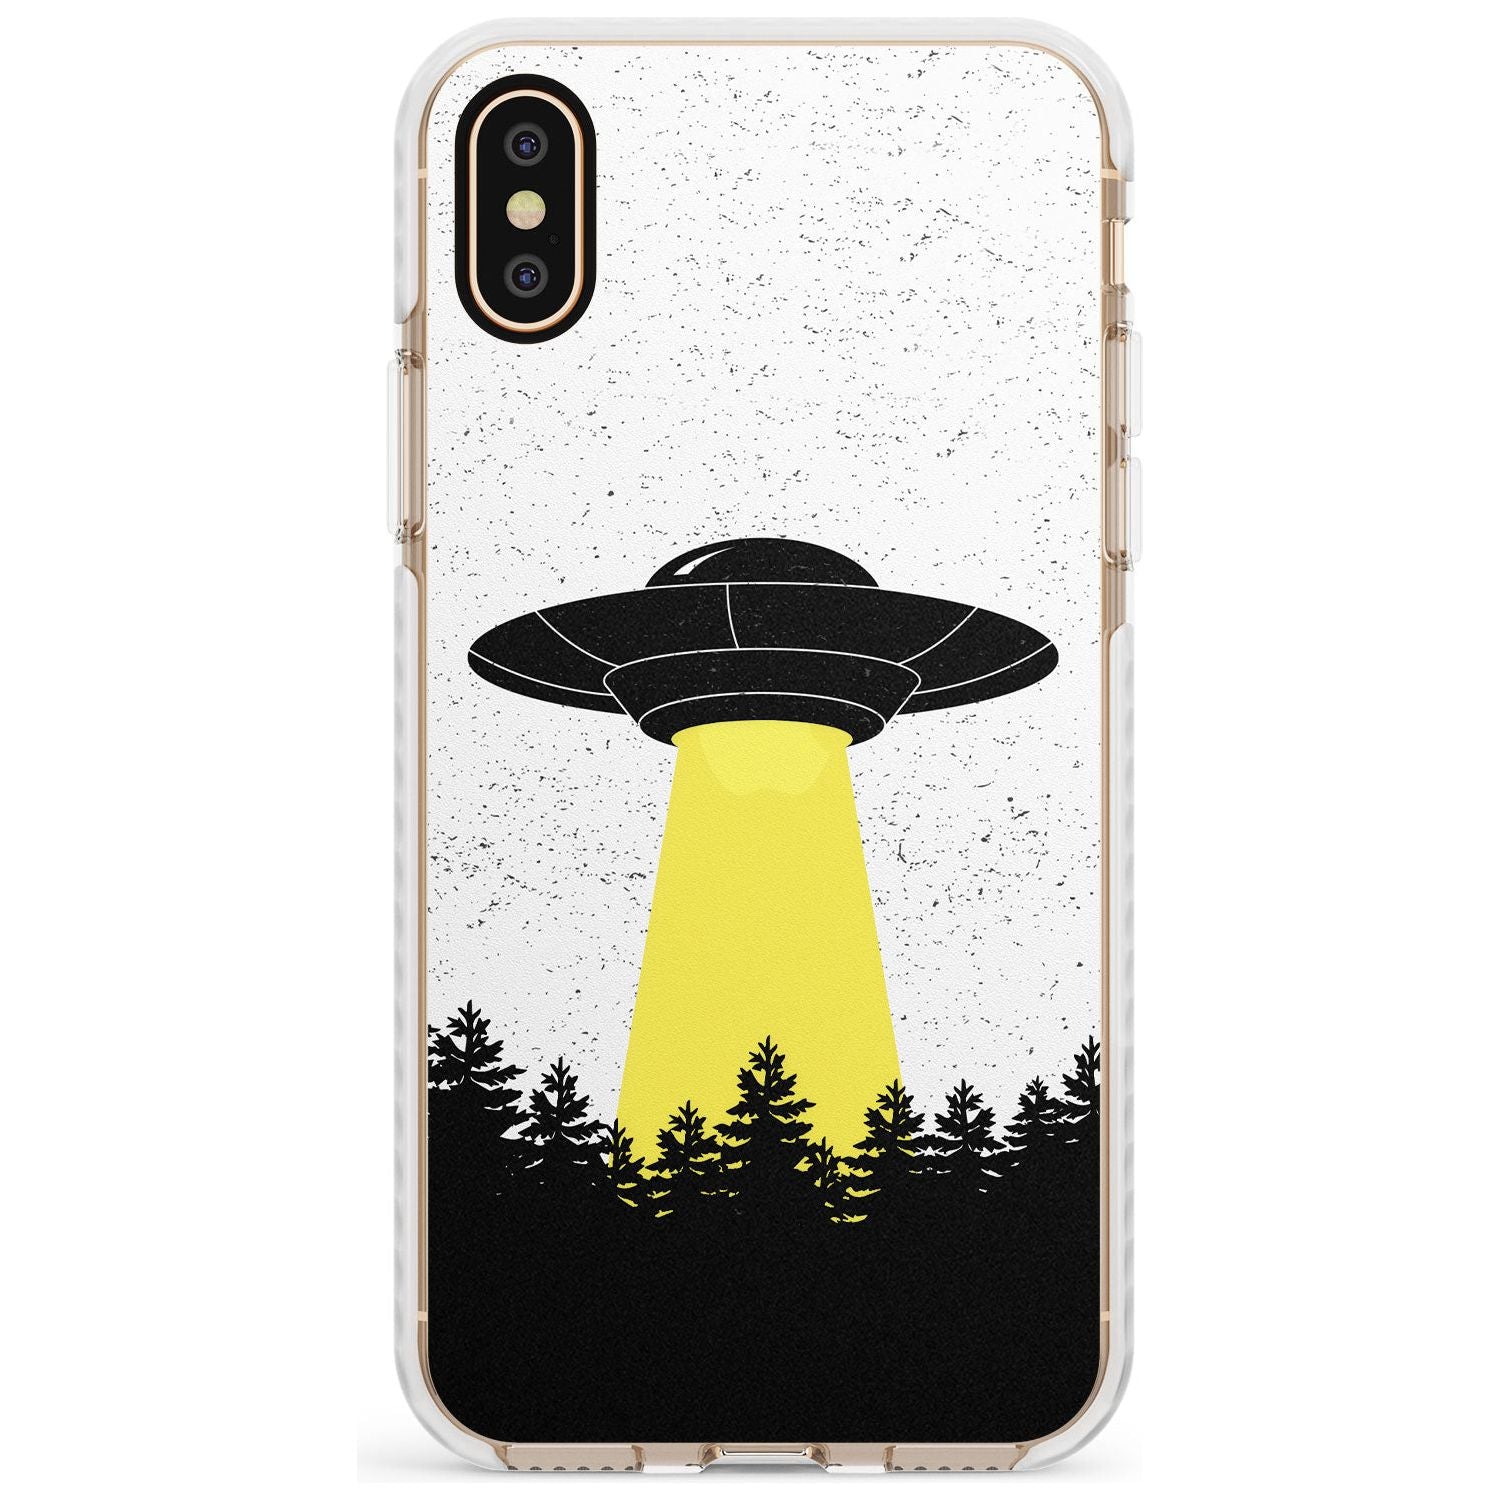 Forest Abduction Impact Phone Case for iPhone X XS Max XR